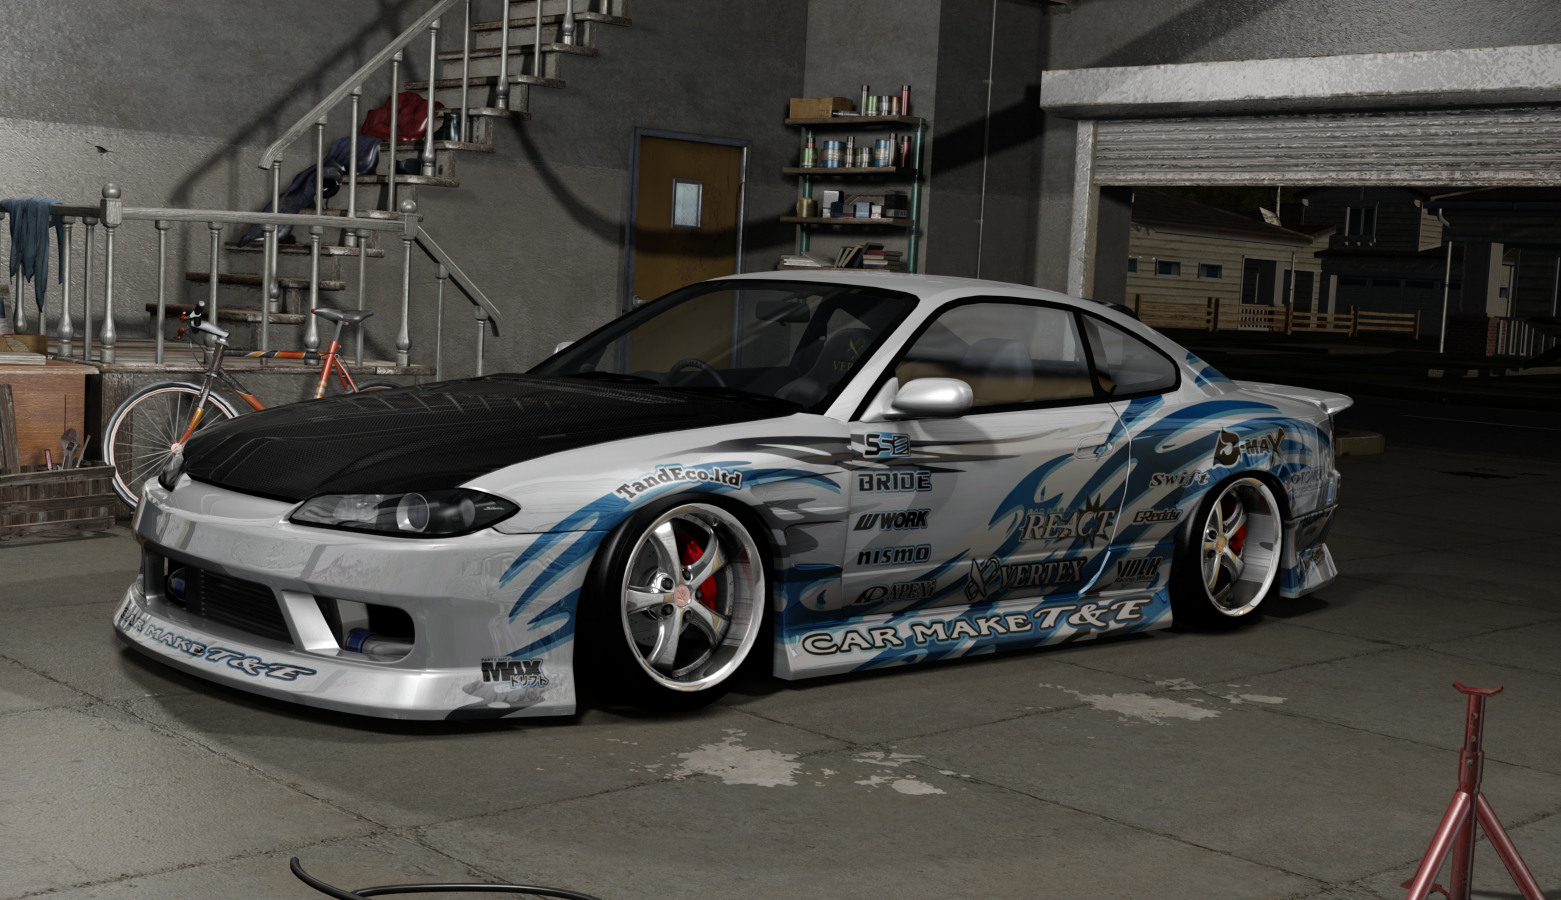 DWG Nissan Silvia S15 Preview Image